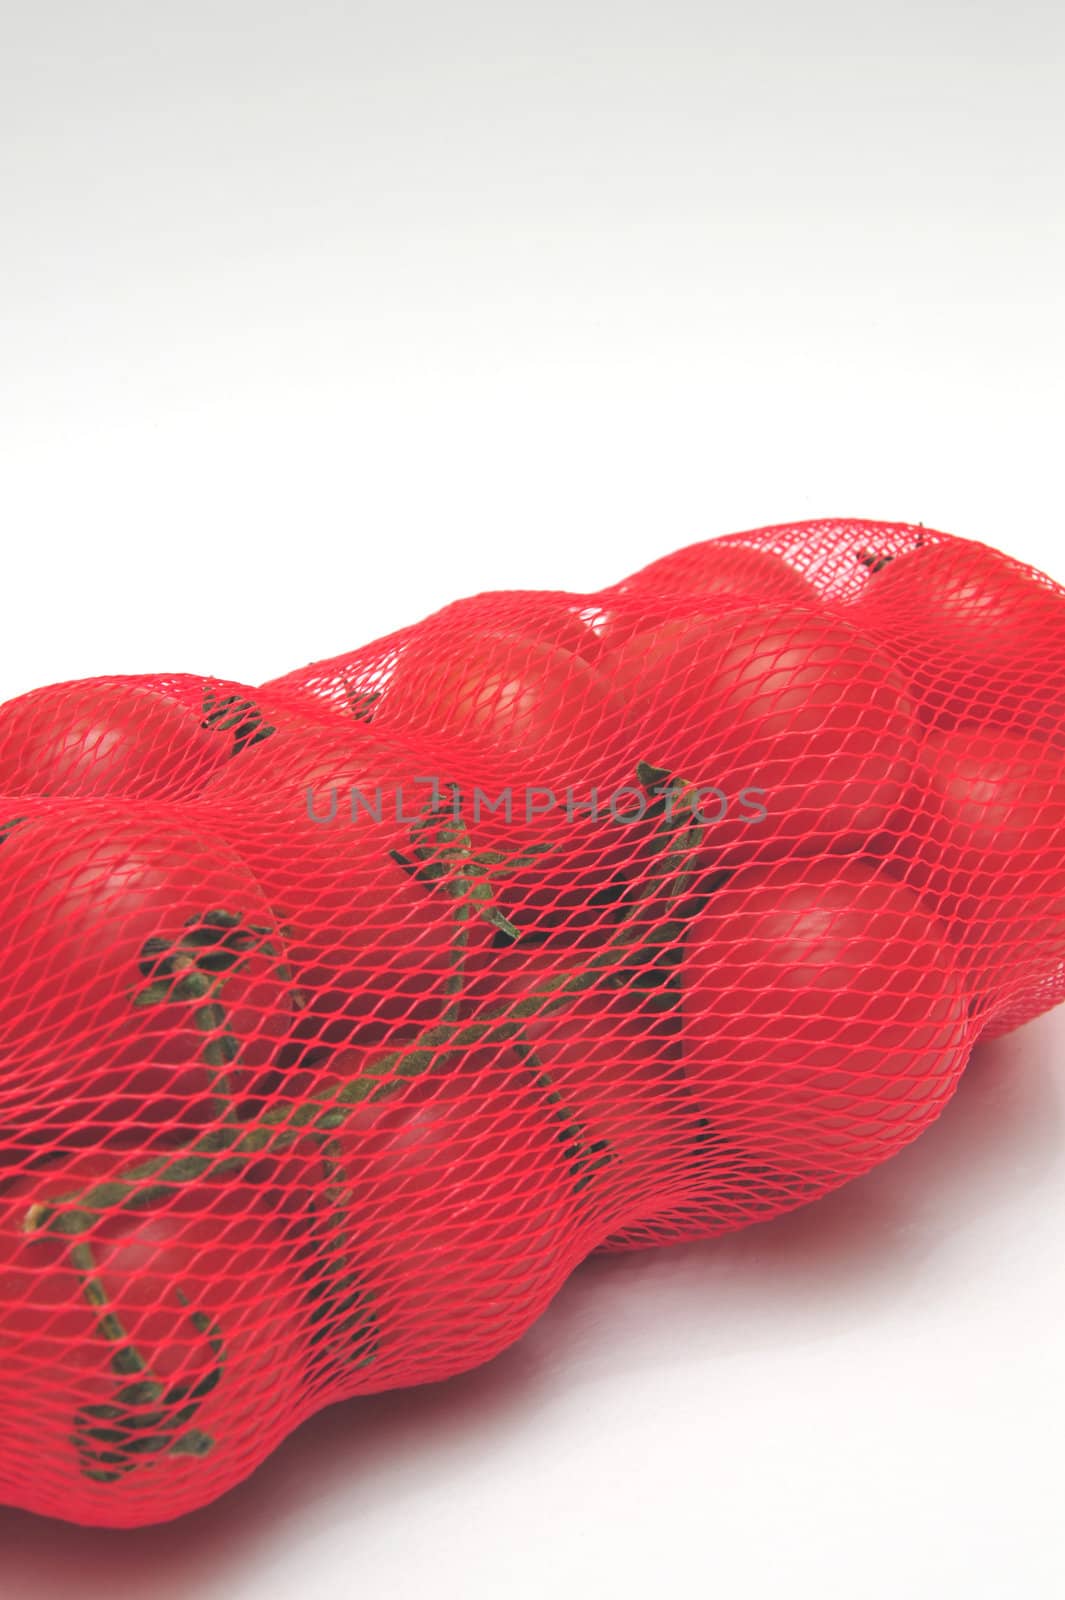 Cherry Tomatoes And Mesh Bag by bendicks